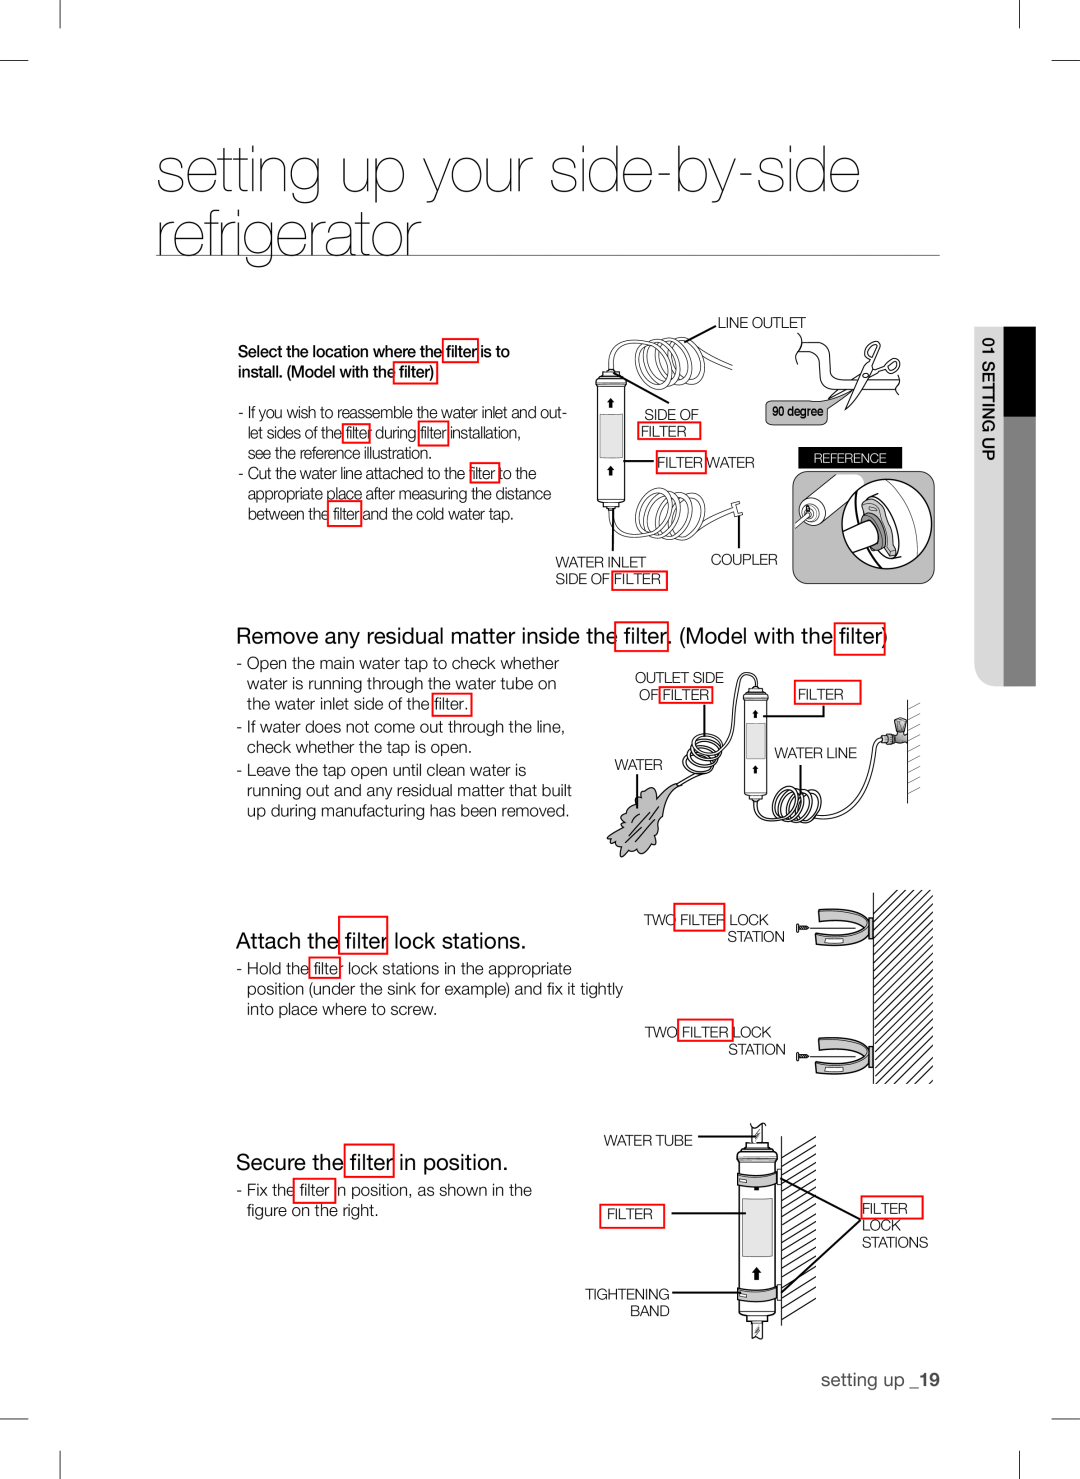 Samsung RSA1D*** Remove any residual matter inside the filter. Model with the filter, Attach the filter lock stations 